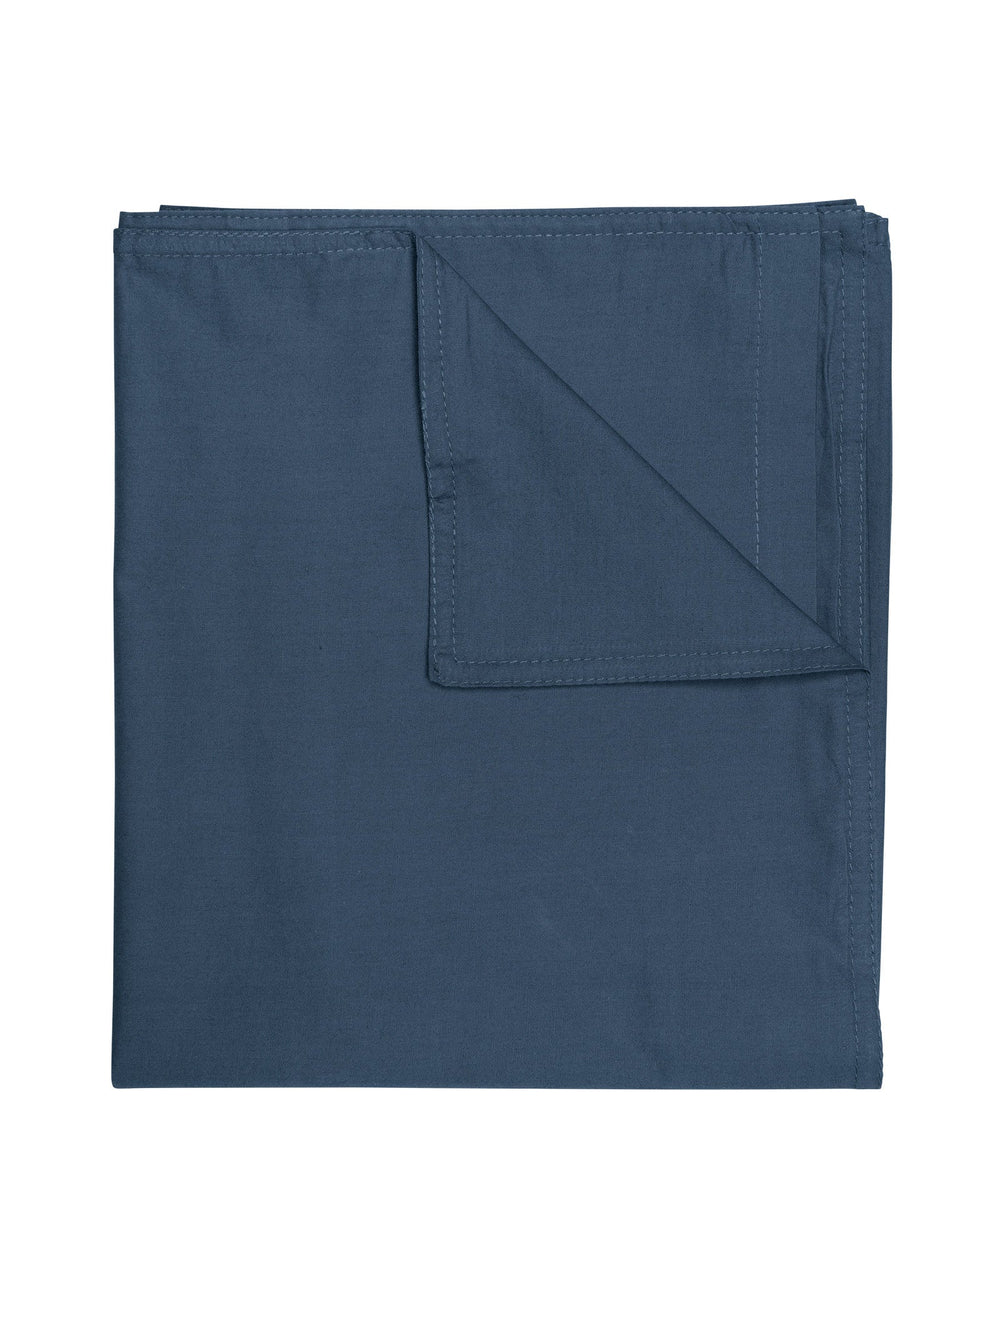 Cotton Wash Fitted Sheet in Orion - Fitted Sheet- Hertex Haus Online - bed & bath